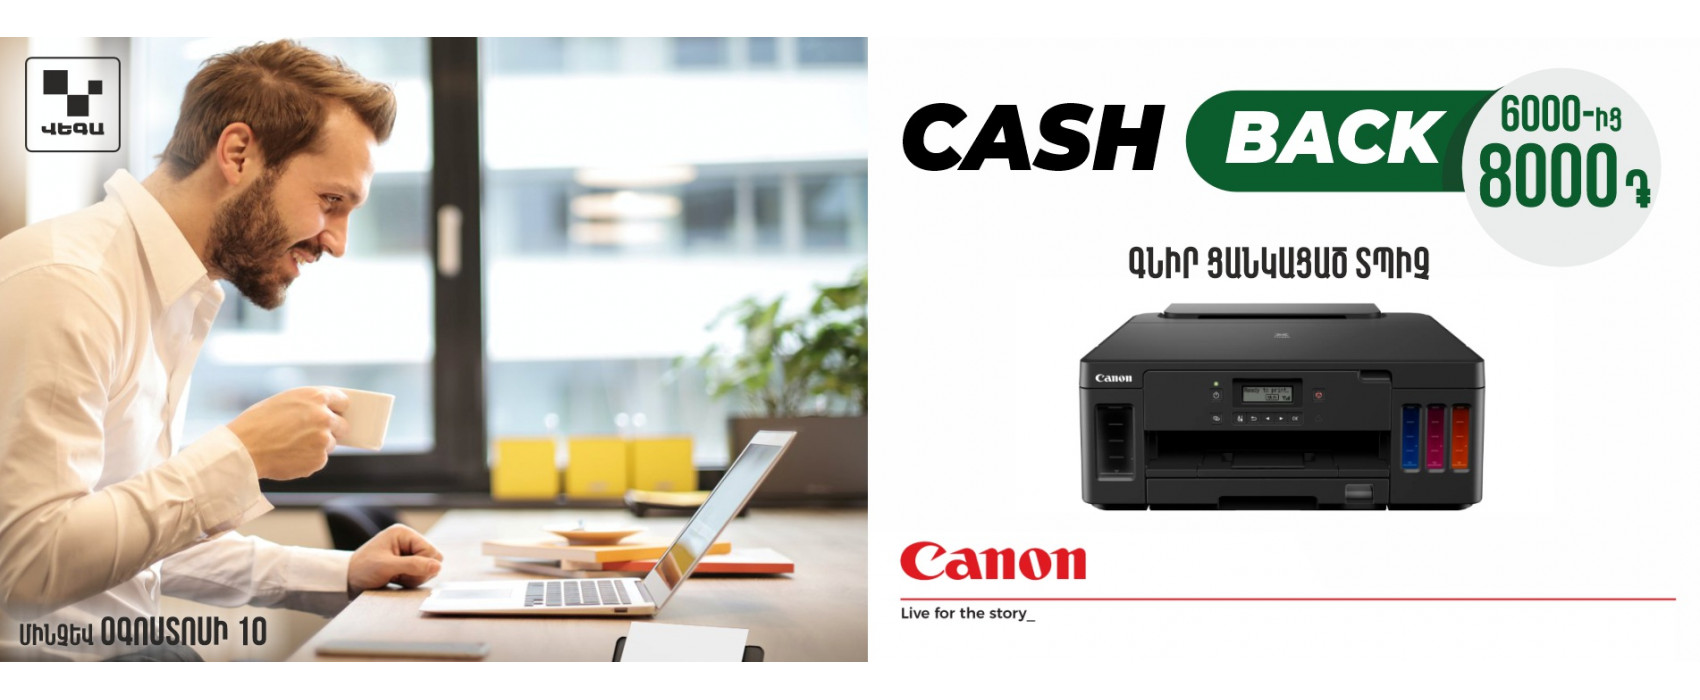 Get CashBack from 6000 to 8000 AMD when buying any CANON printer